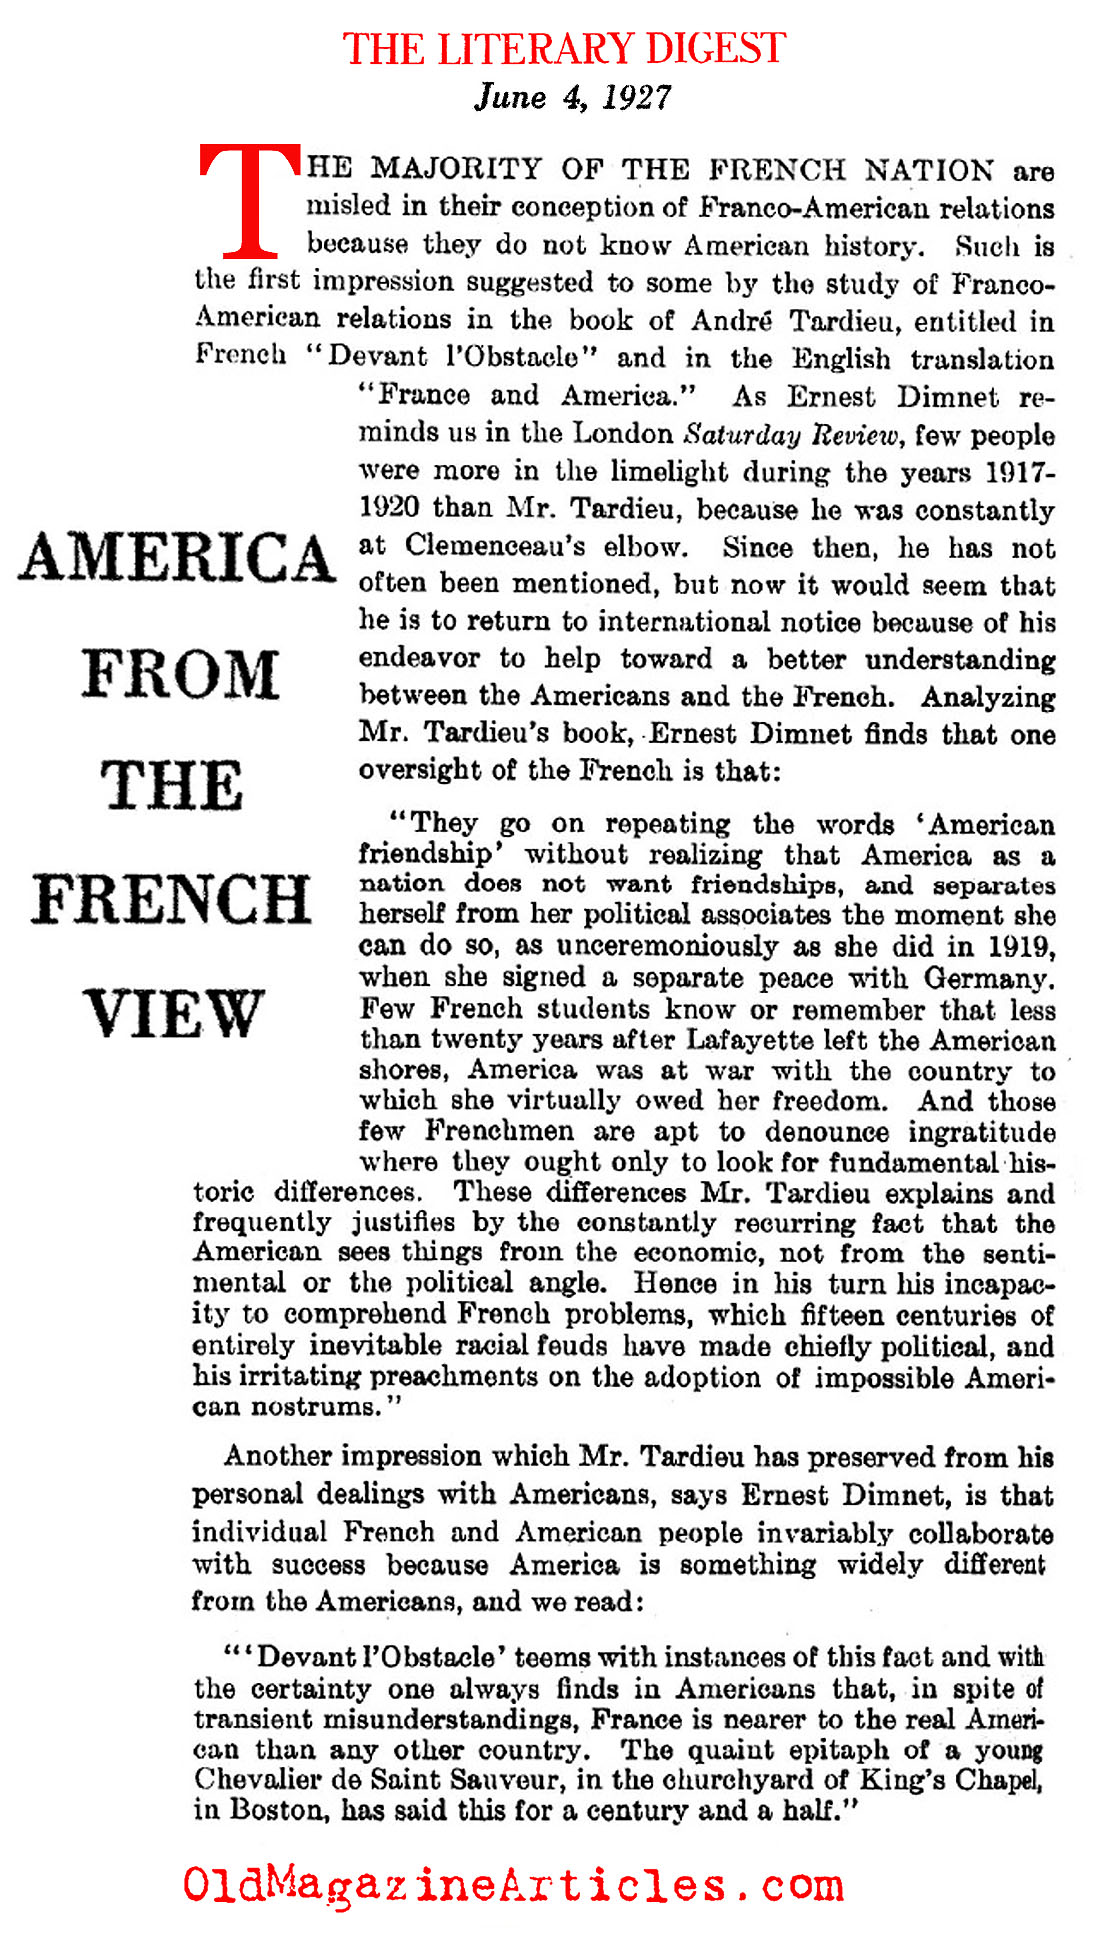 Franco-American Relations After W.W. I (Literary Digest, 1927)